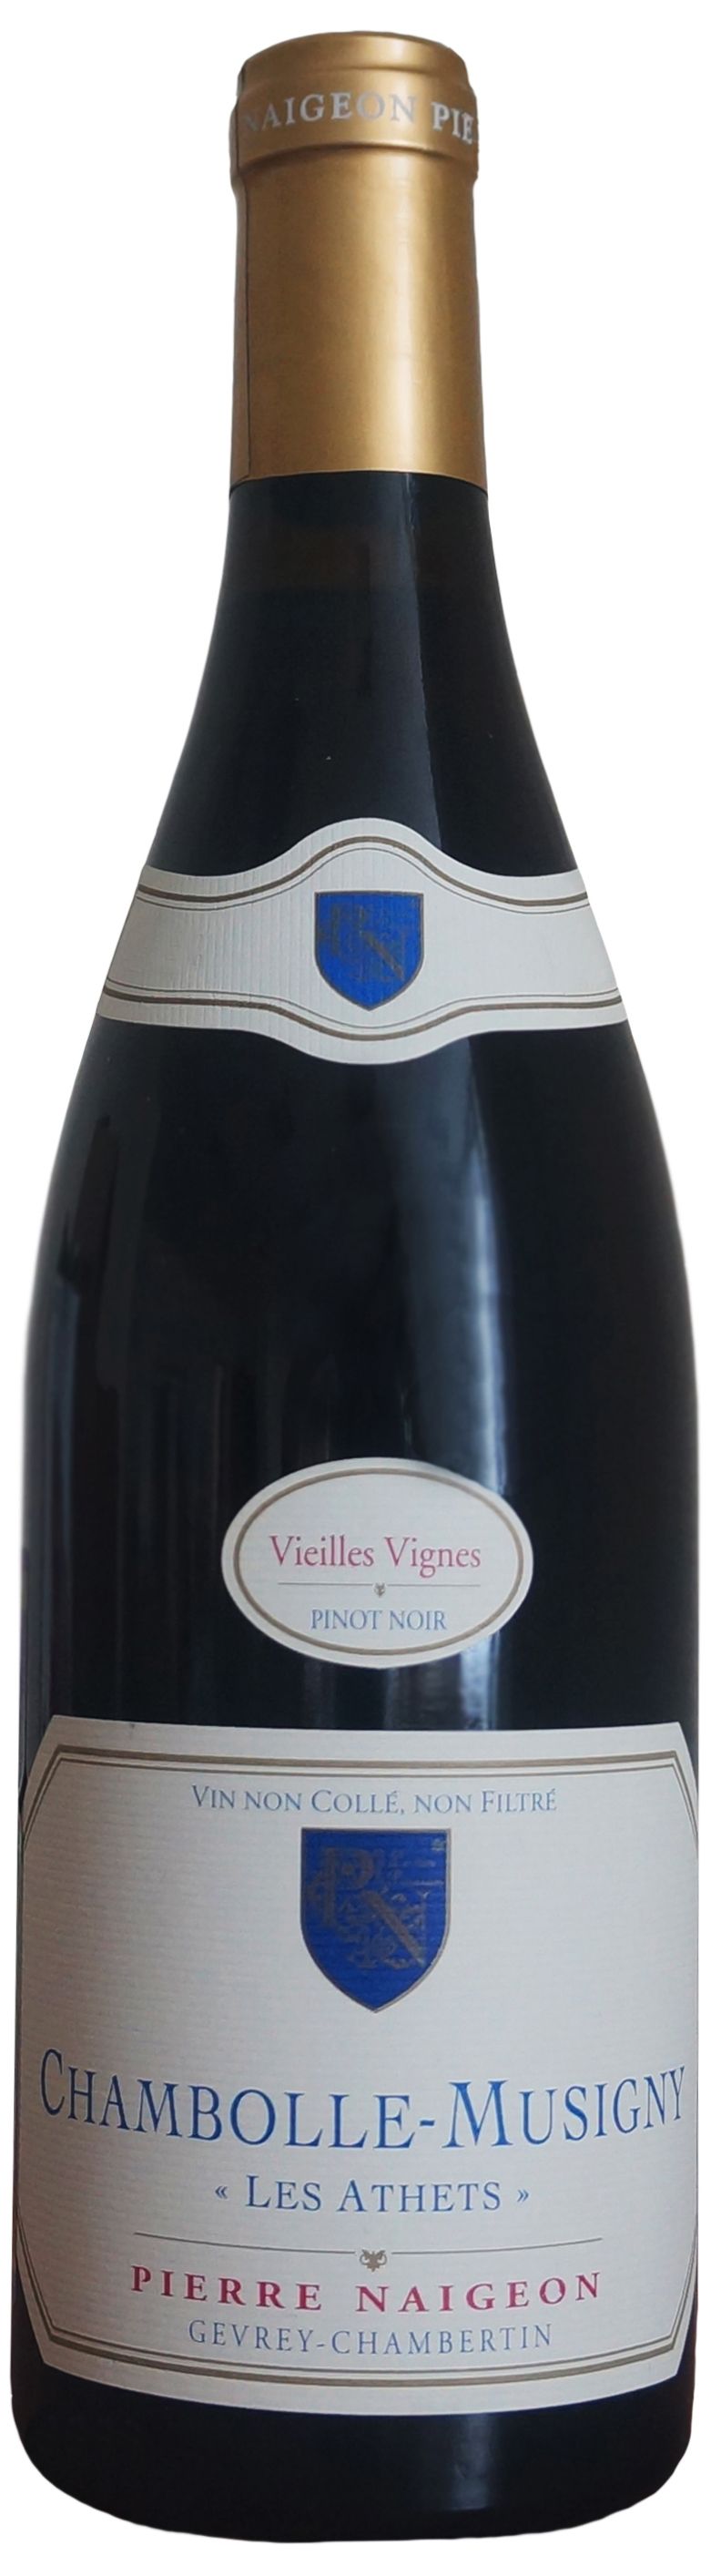 Pierre Naigeon, Chambolle-Musigny Les Athets Vieilles Vignes, 2011